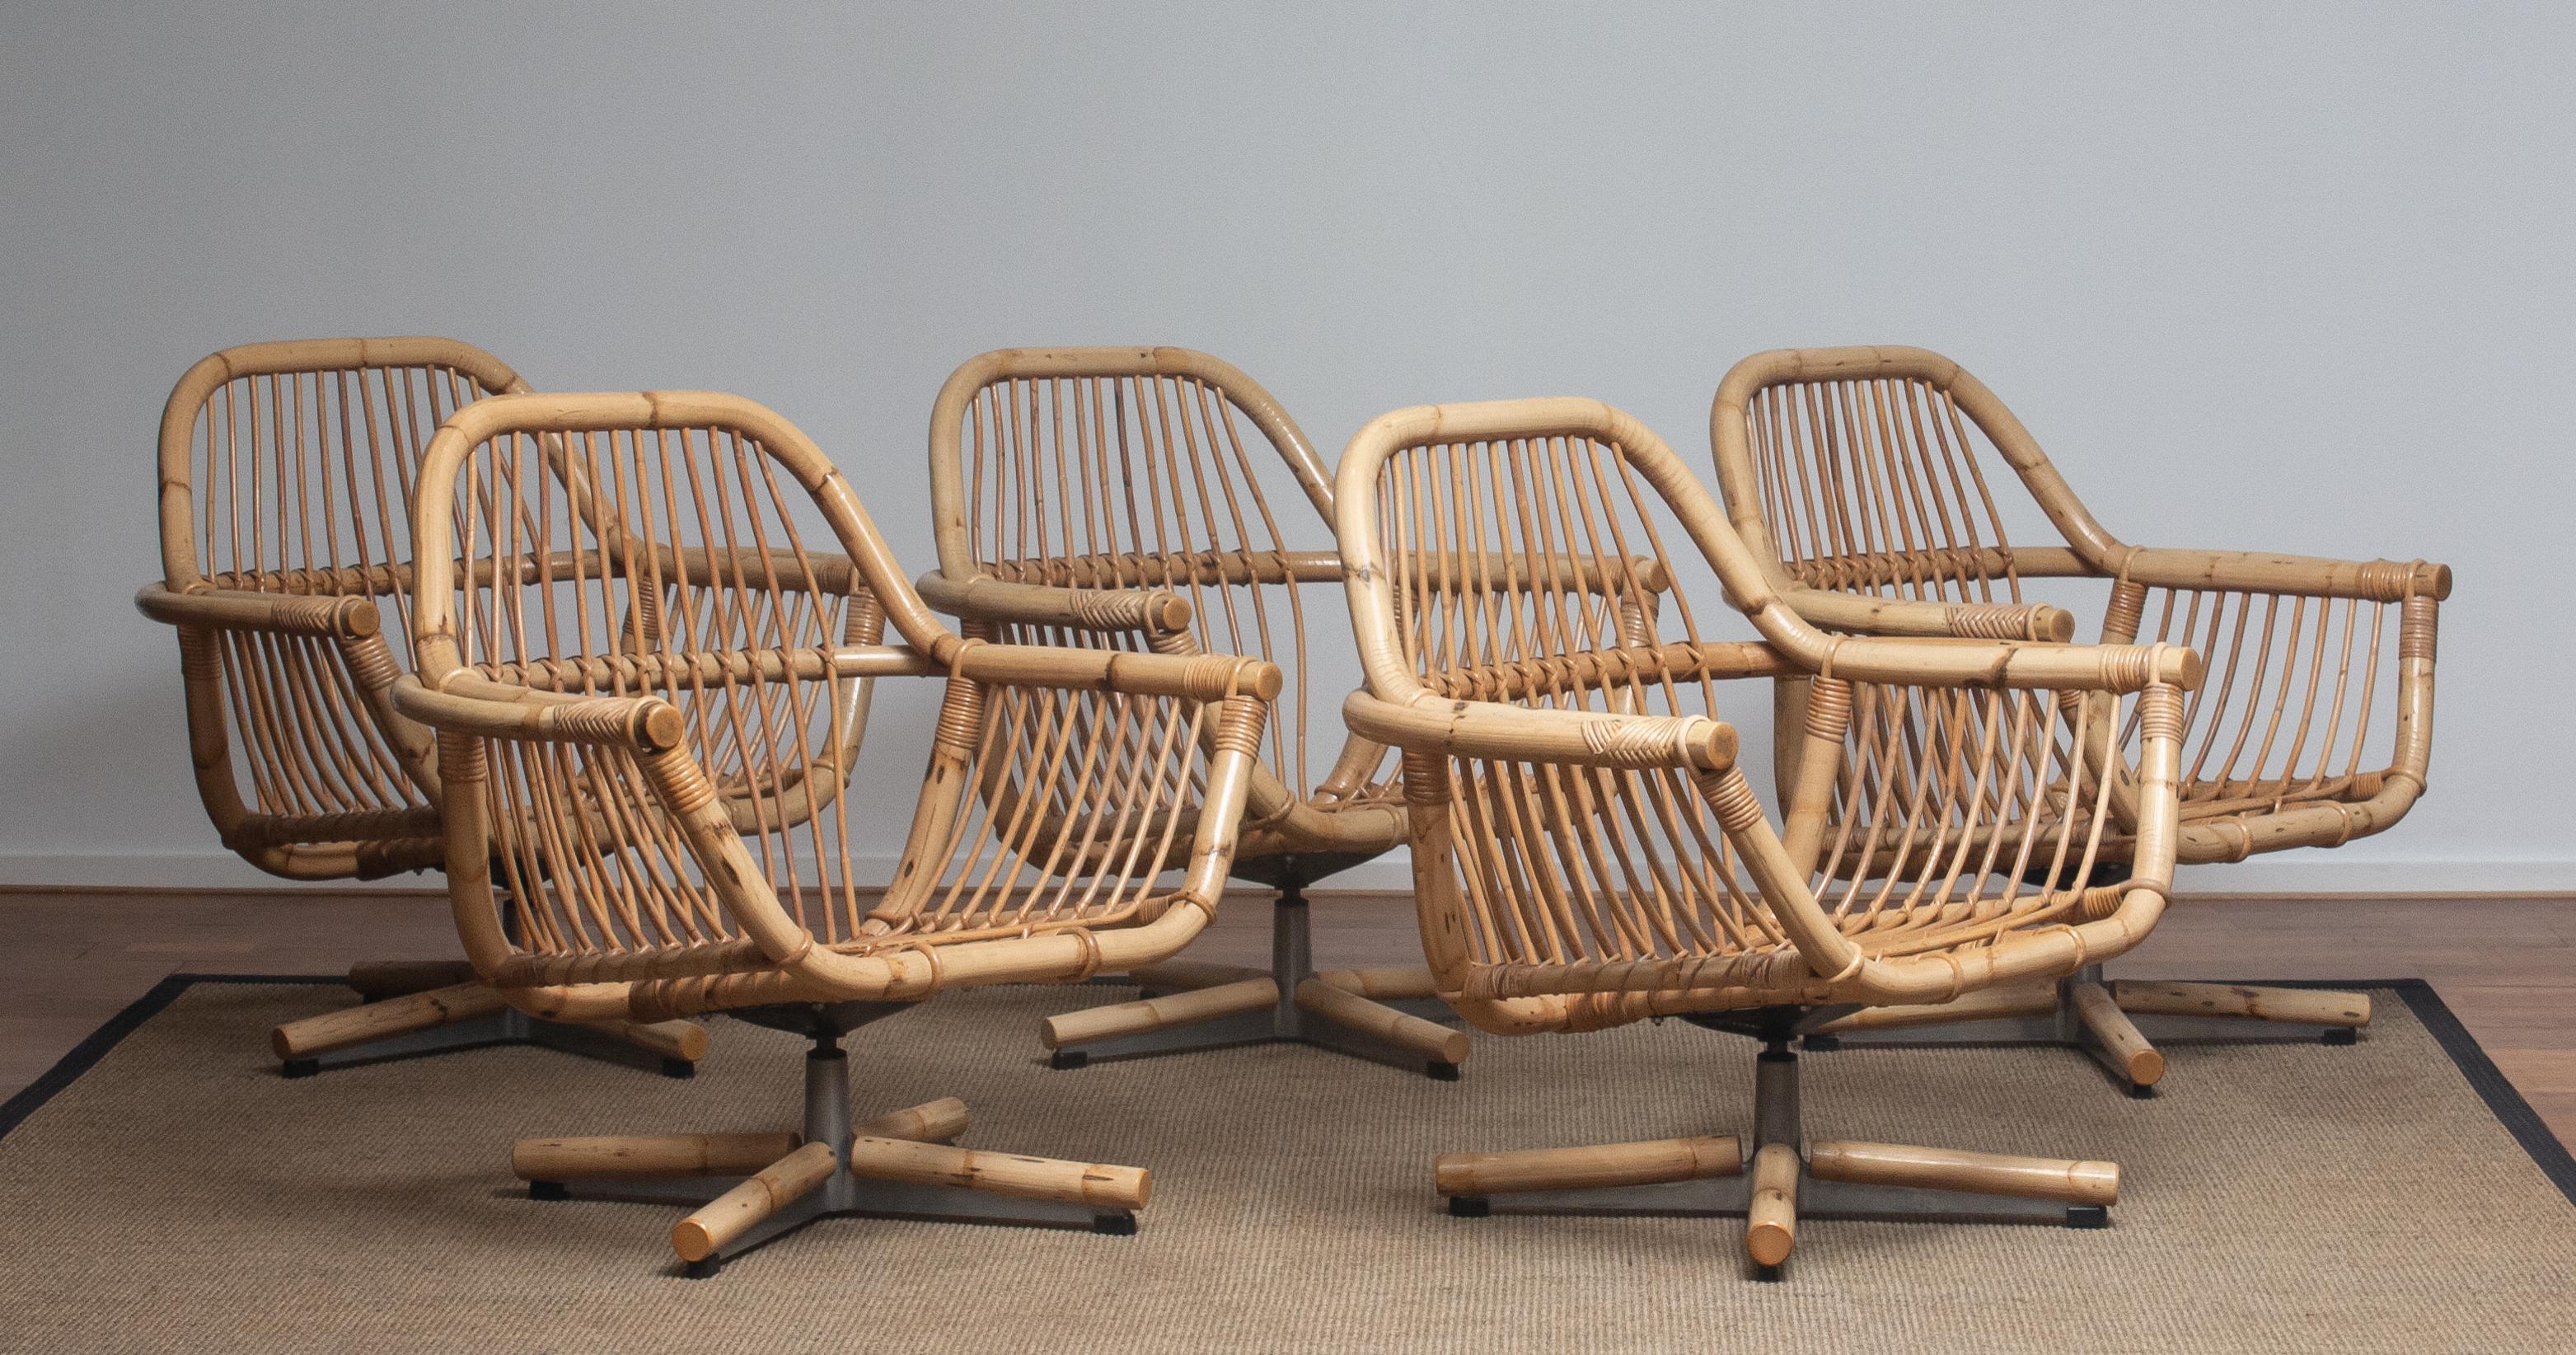 1960s Rattan Garden Set / Lounge Set Consist Five Swivel Chairs and Coffee Table 3